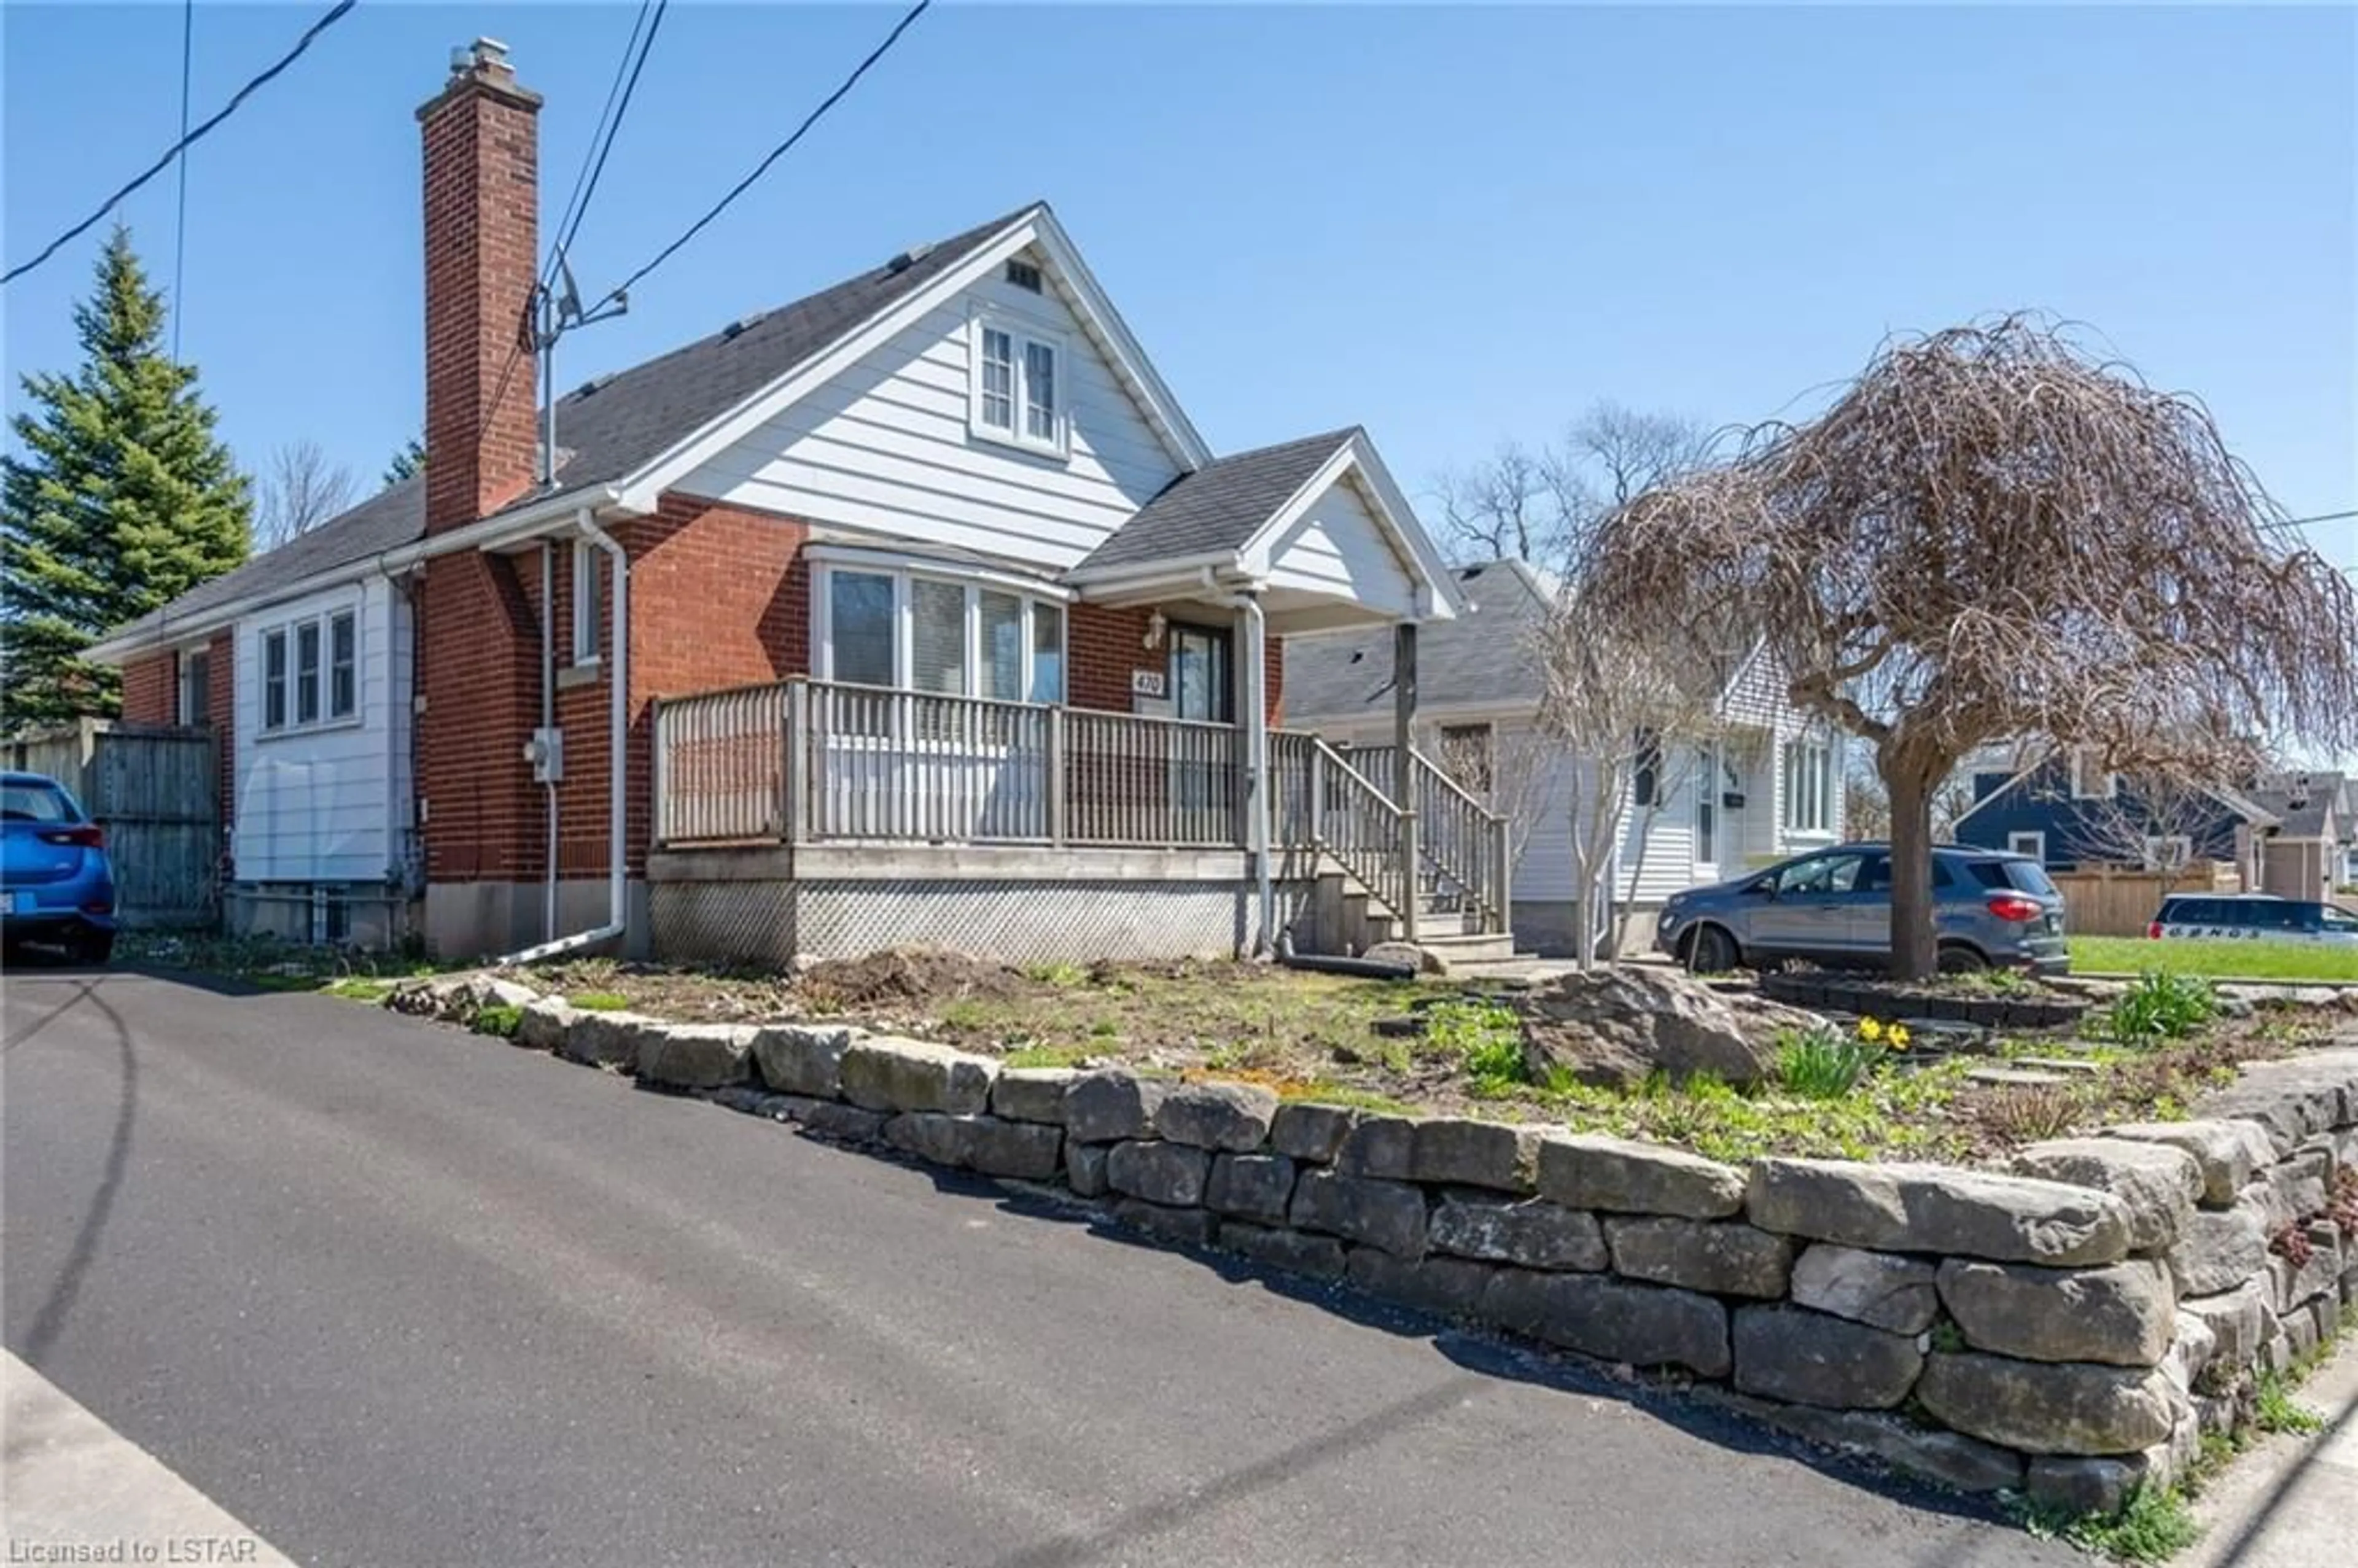 Frontside or backside of a home for 470 Ashland Ave, London Ontario N5W 4G7